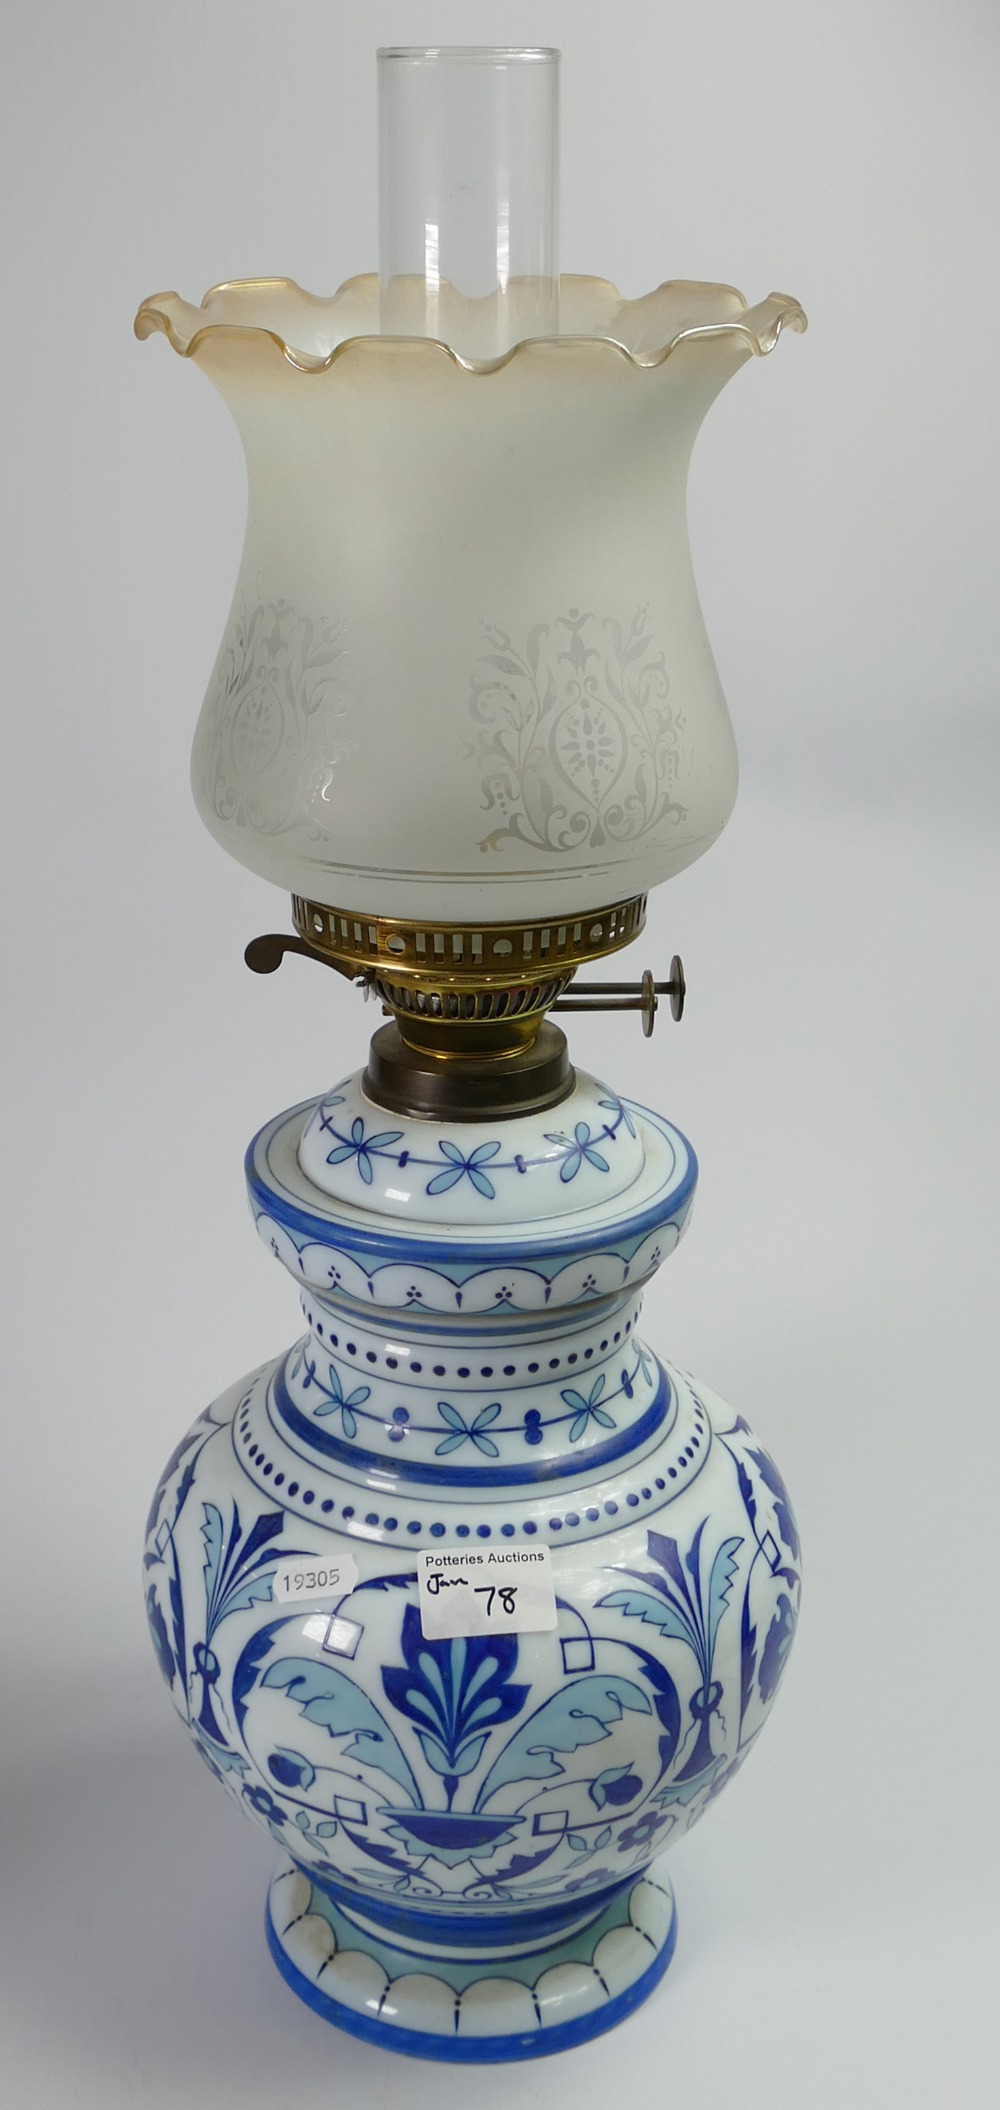 Early 20th Century Decorated Glass Oil Burner Table Lamp: nips noted to rim,